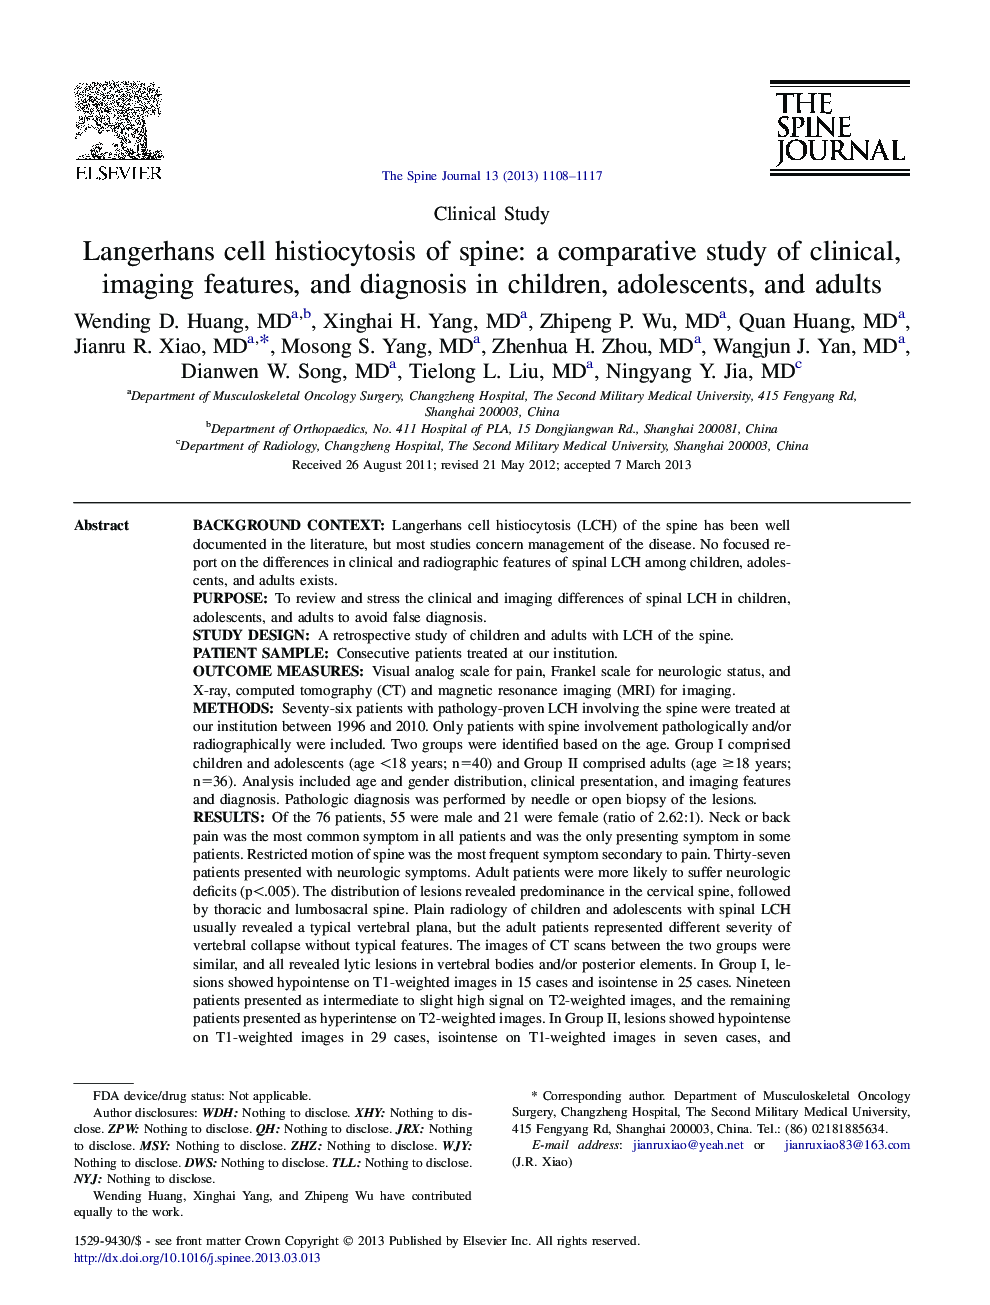 Langerhans cell histiocytosis of spine: a comparative study of clinical, imaging features, and diagnosis in children, adolescents, and adults 